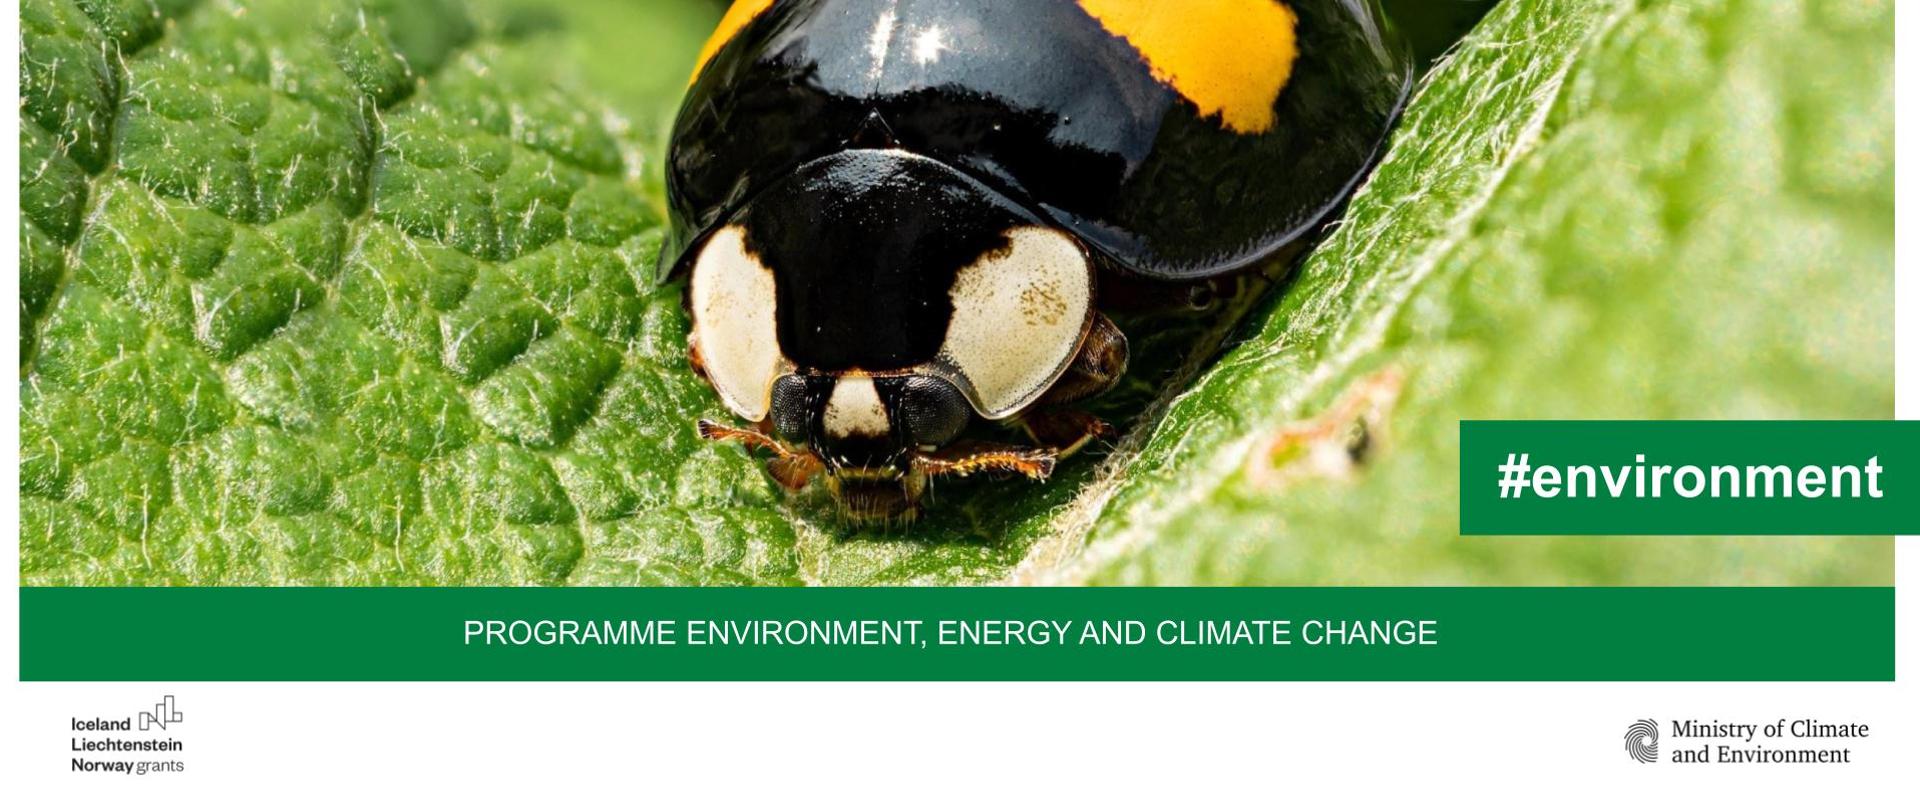 Environment Energy and Climate Change Programme #environment alien spacies